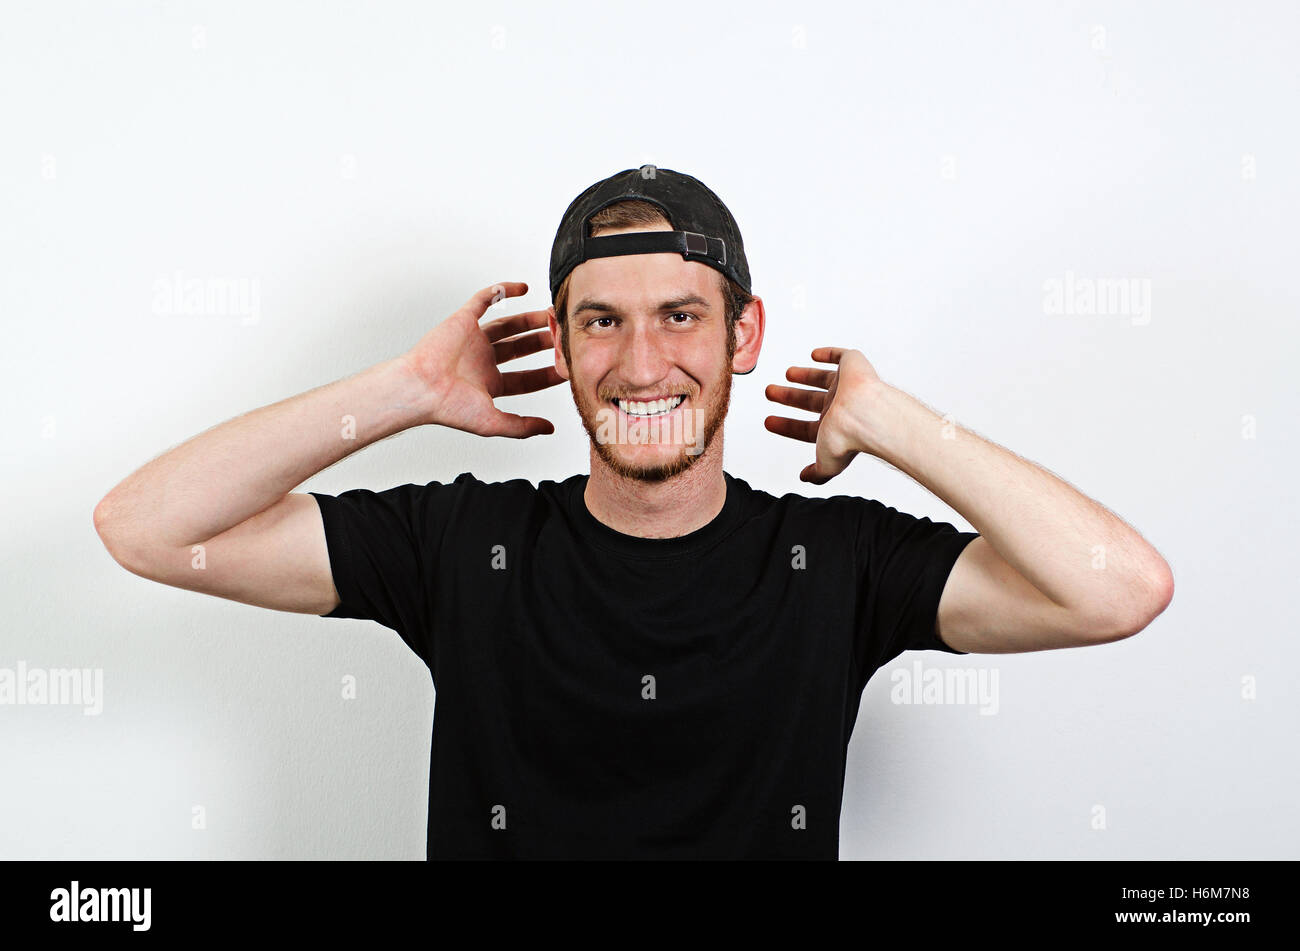 Joyful and Smiling Happy Young Adult Male in Dark T-Shirt and Baseball Hat Worn Backwards Stock Photo